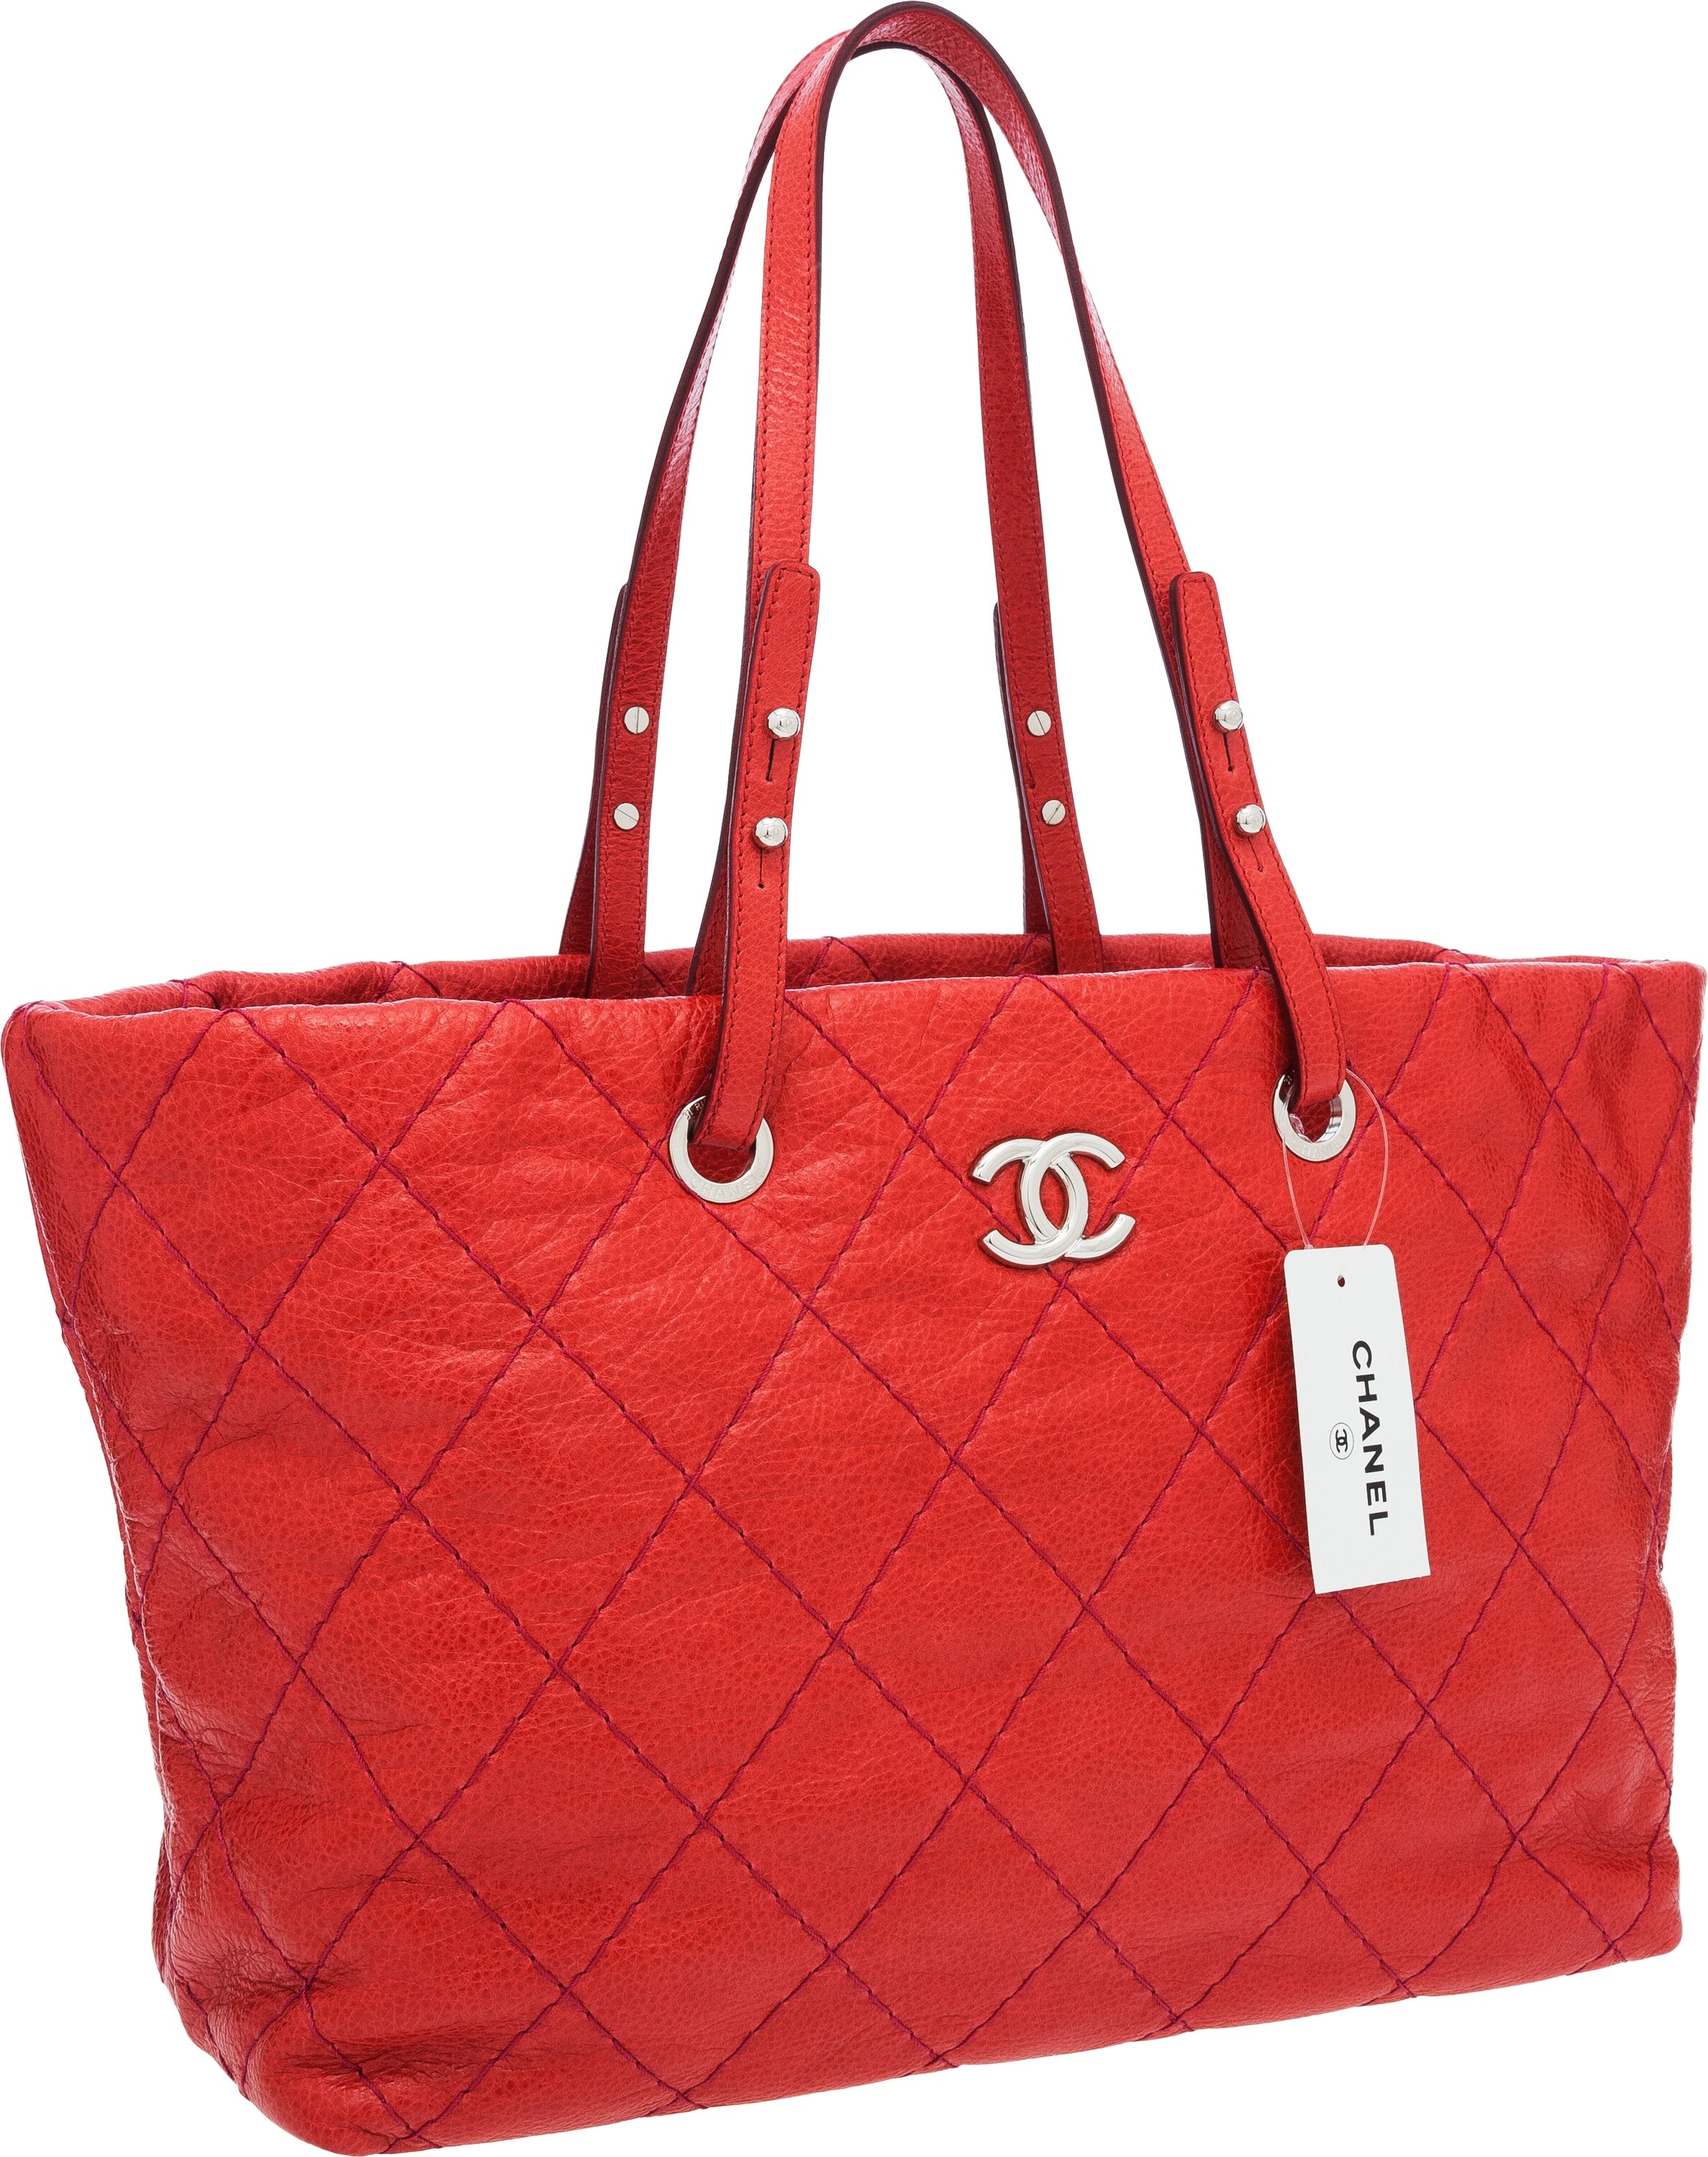 Chanel Red Quilted Patent Leather 2.55 Reissue Flap Accordion Bag – OPA  Vintage